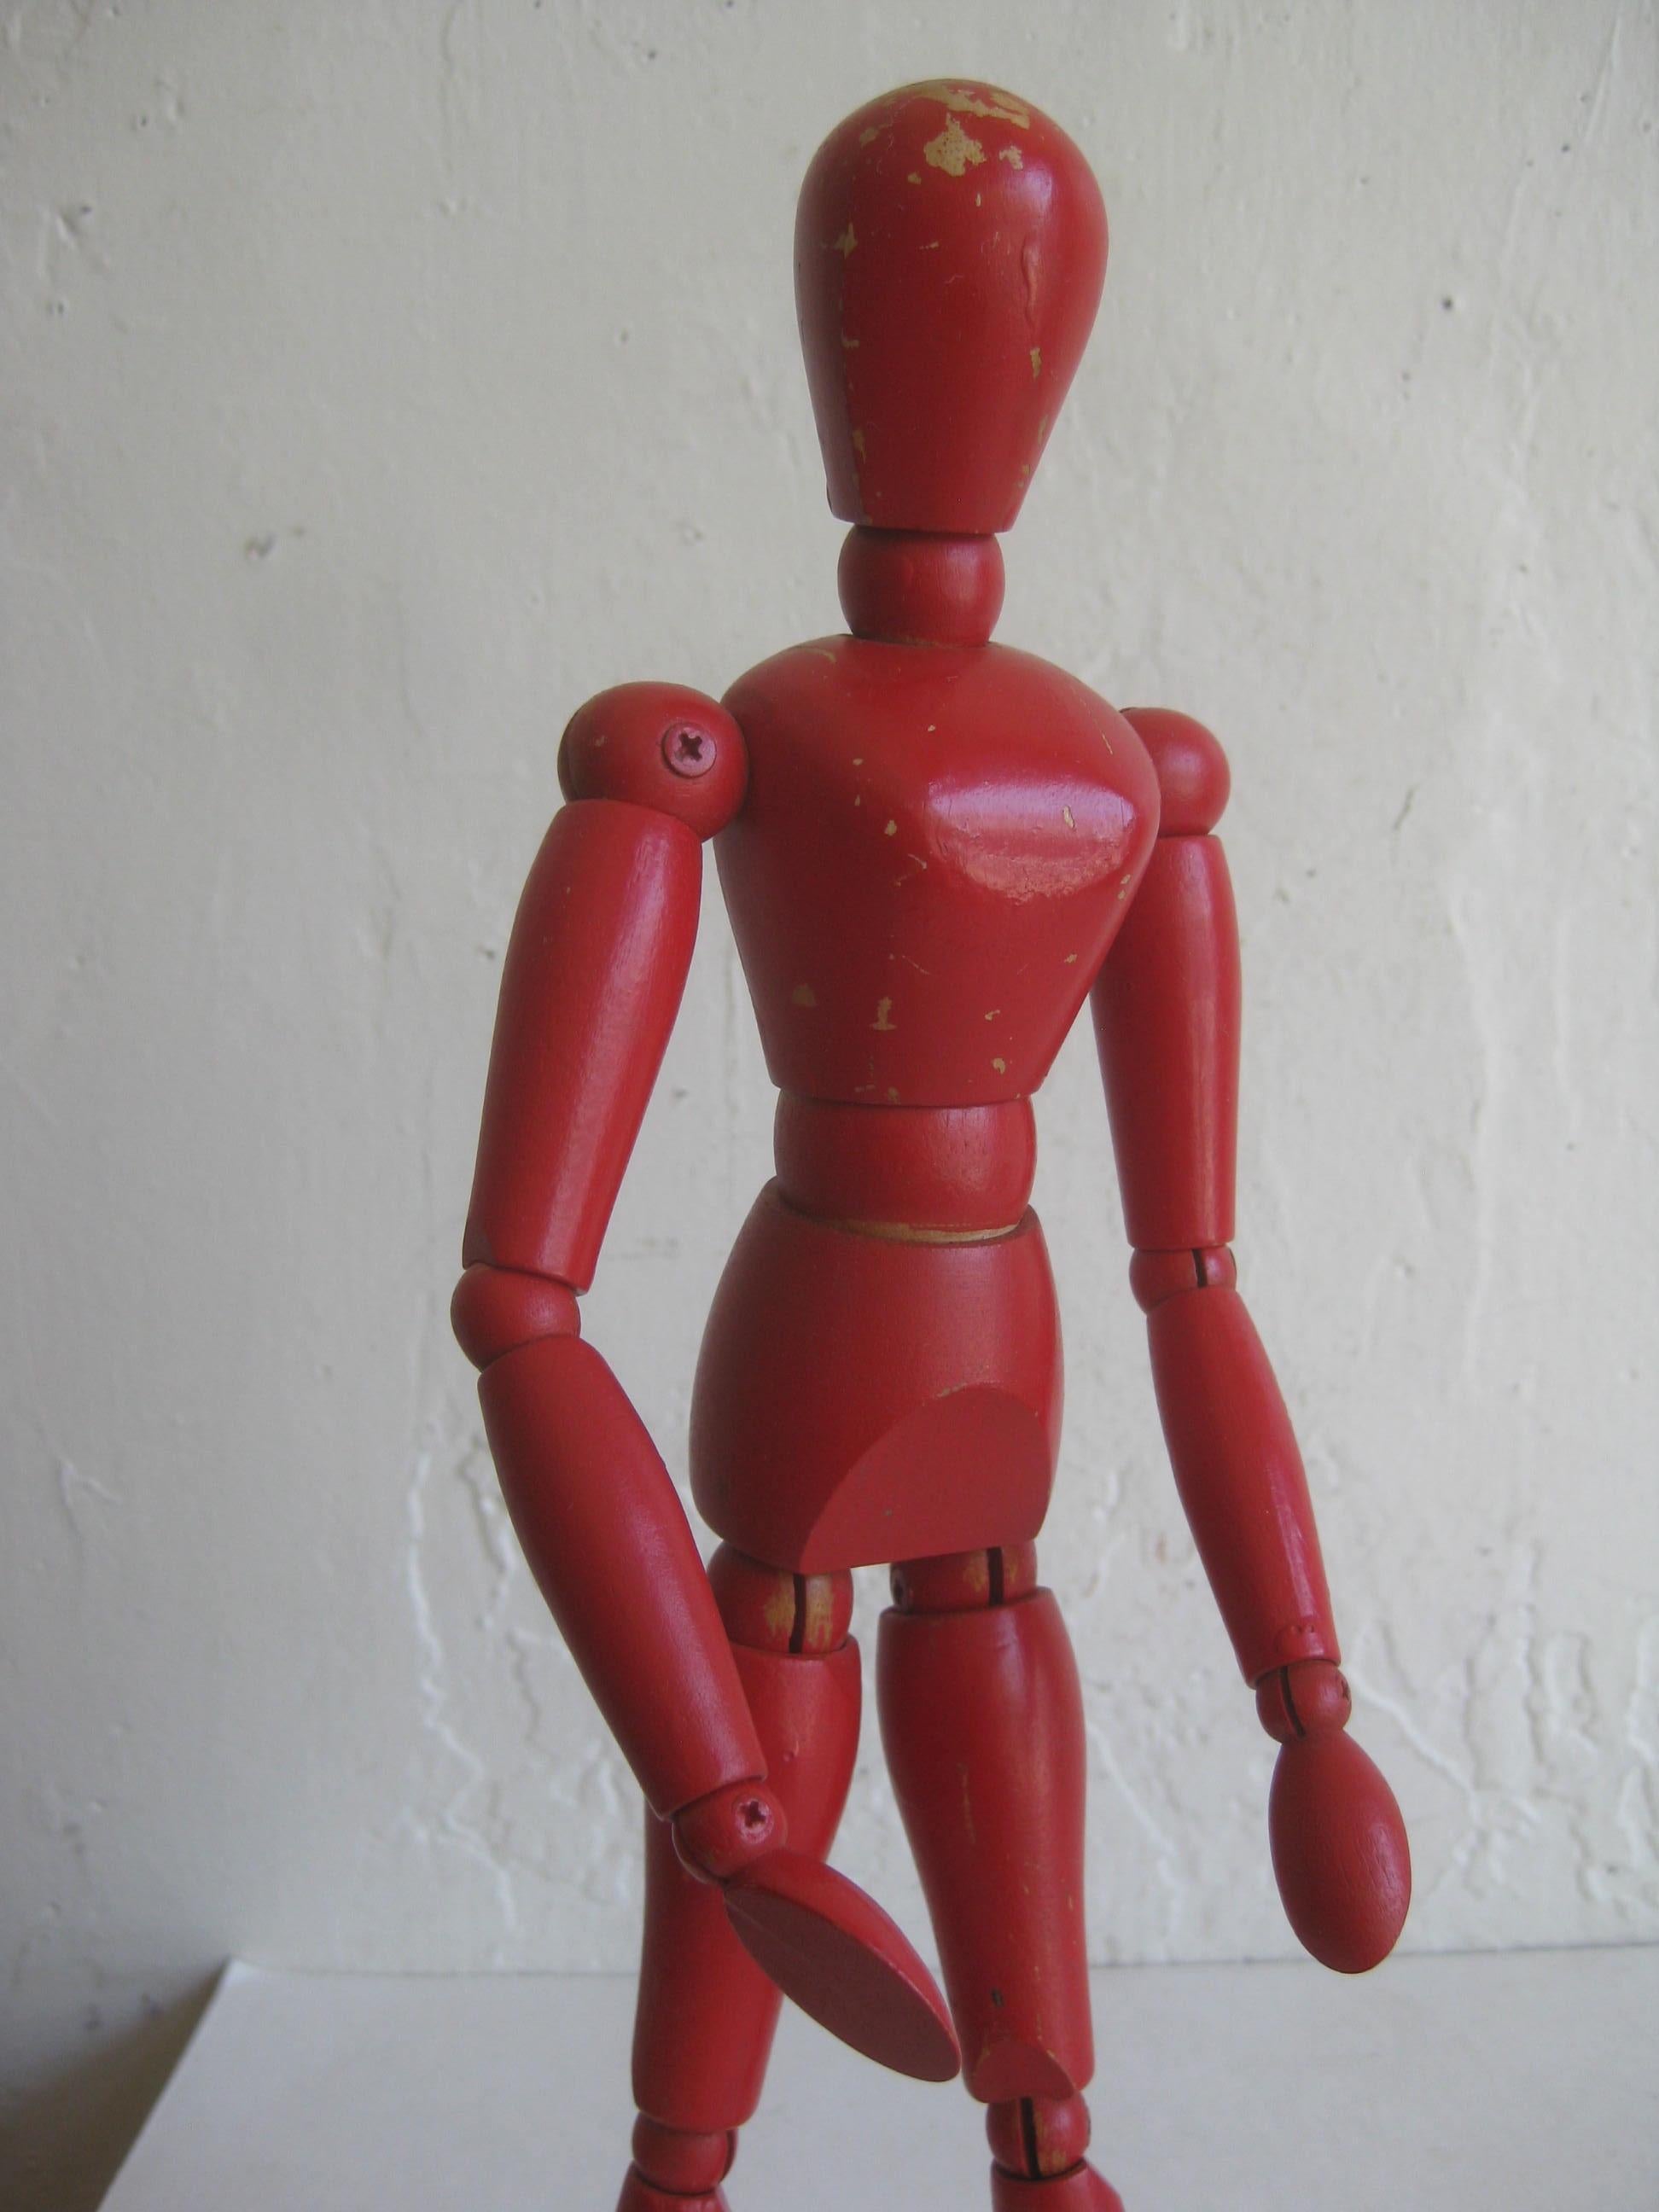 High quality antique articulated wood artist nude figural model sculpture dating from the 1940s-1950s. The model is a tough to find version with the original red enamel paint. In very nice shape and can be posed many different ways. Some paint loss